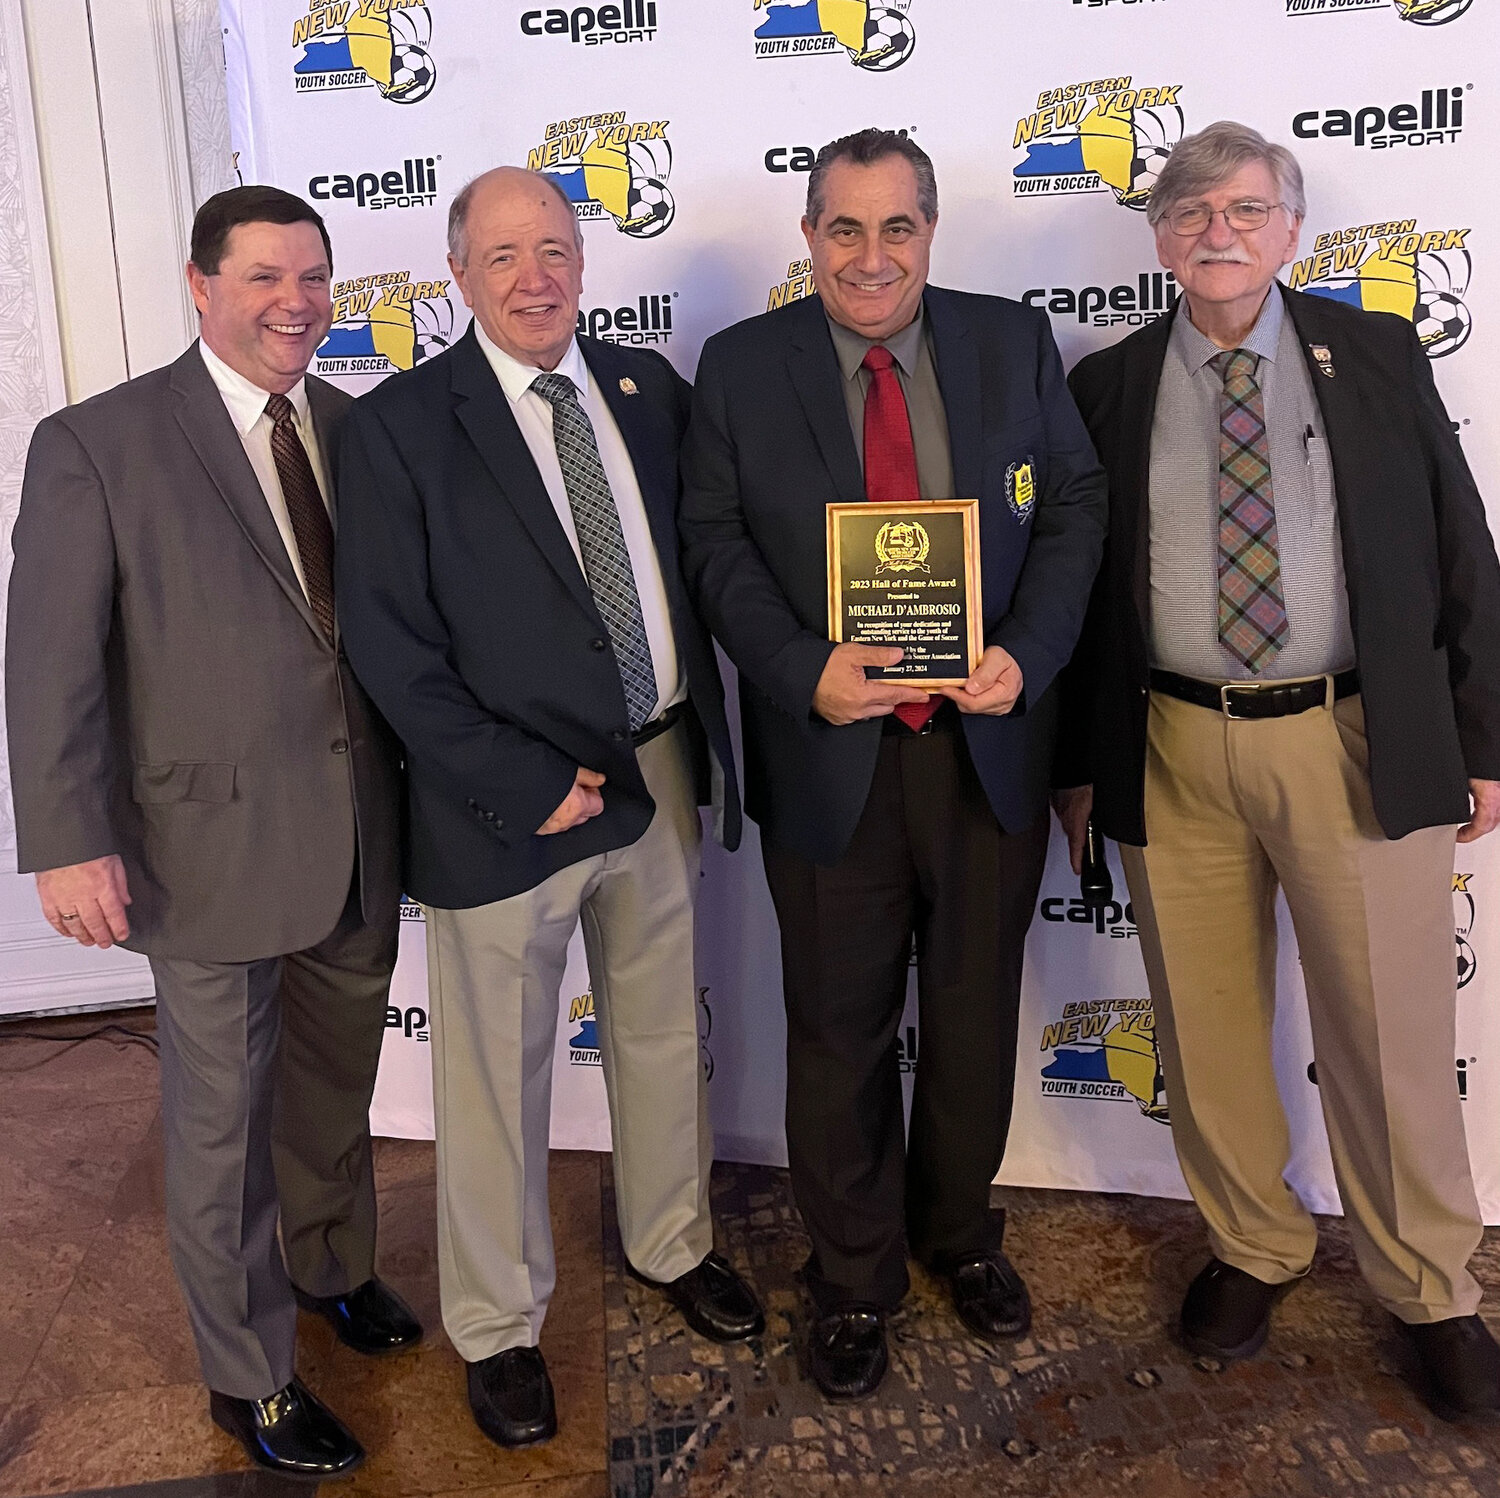 Eastern New York Youth Soccer Association first vice president Bill Smith with president Richard Christiano, Michael D’Ambrosio and Hall of Fame chairperson Ken Gulmi.